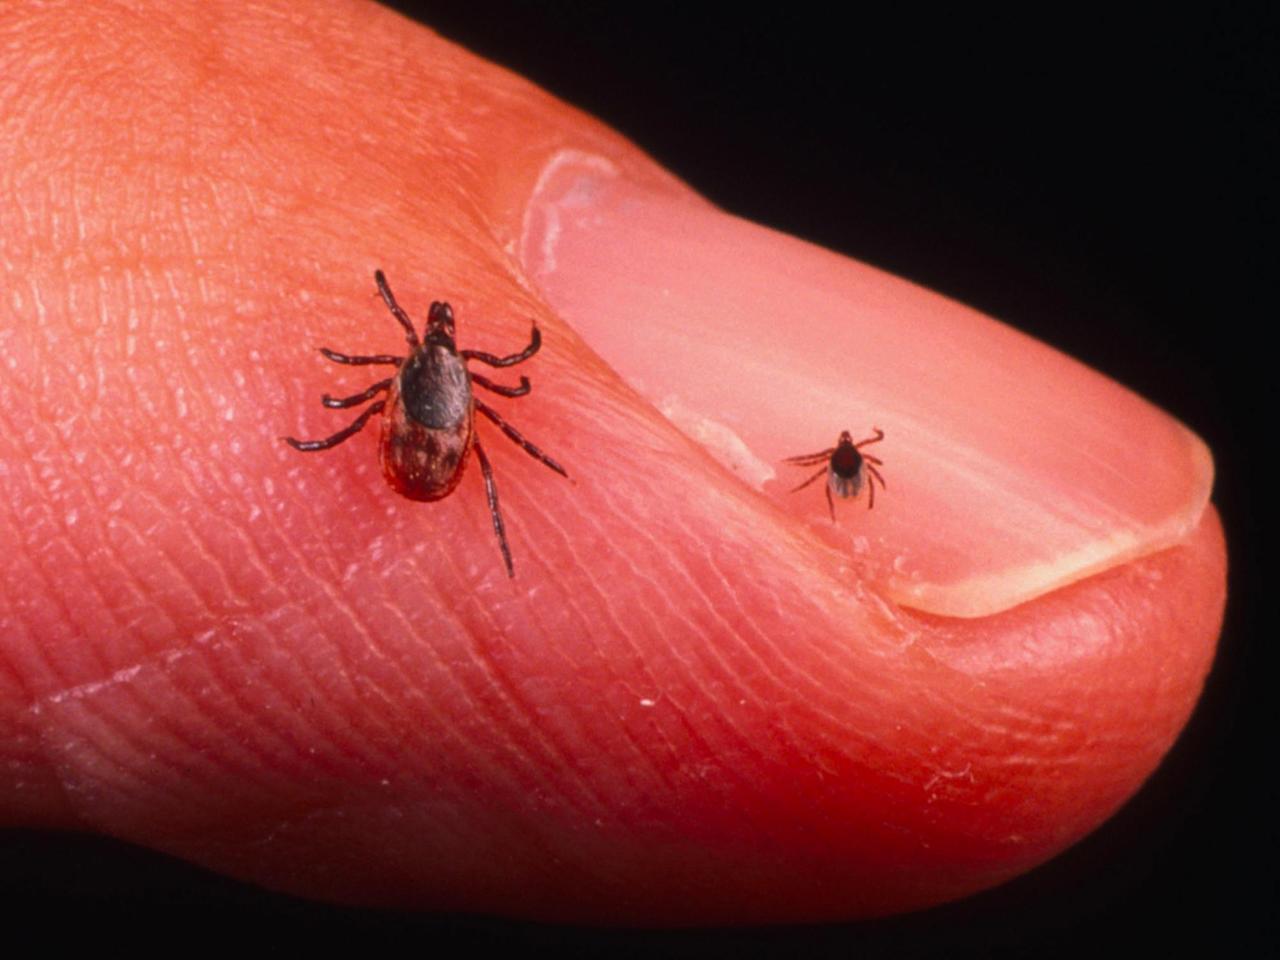 A new Lyme disease vaccine will soon be tested on Americans and Europeans